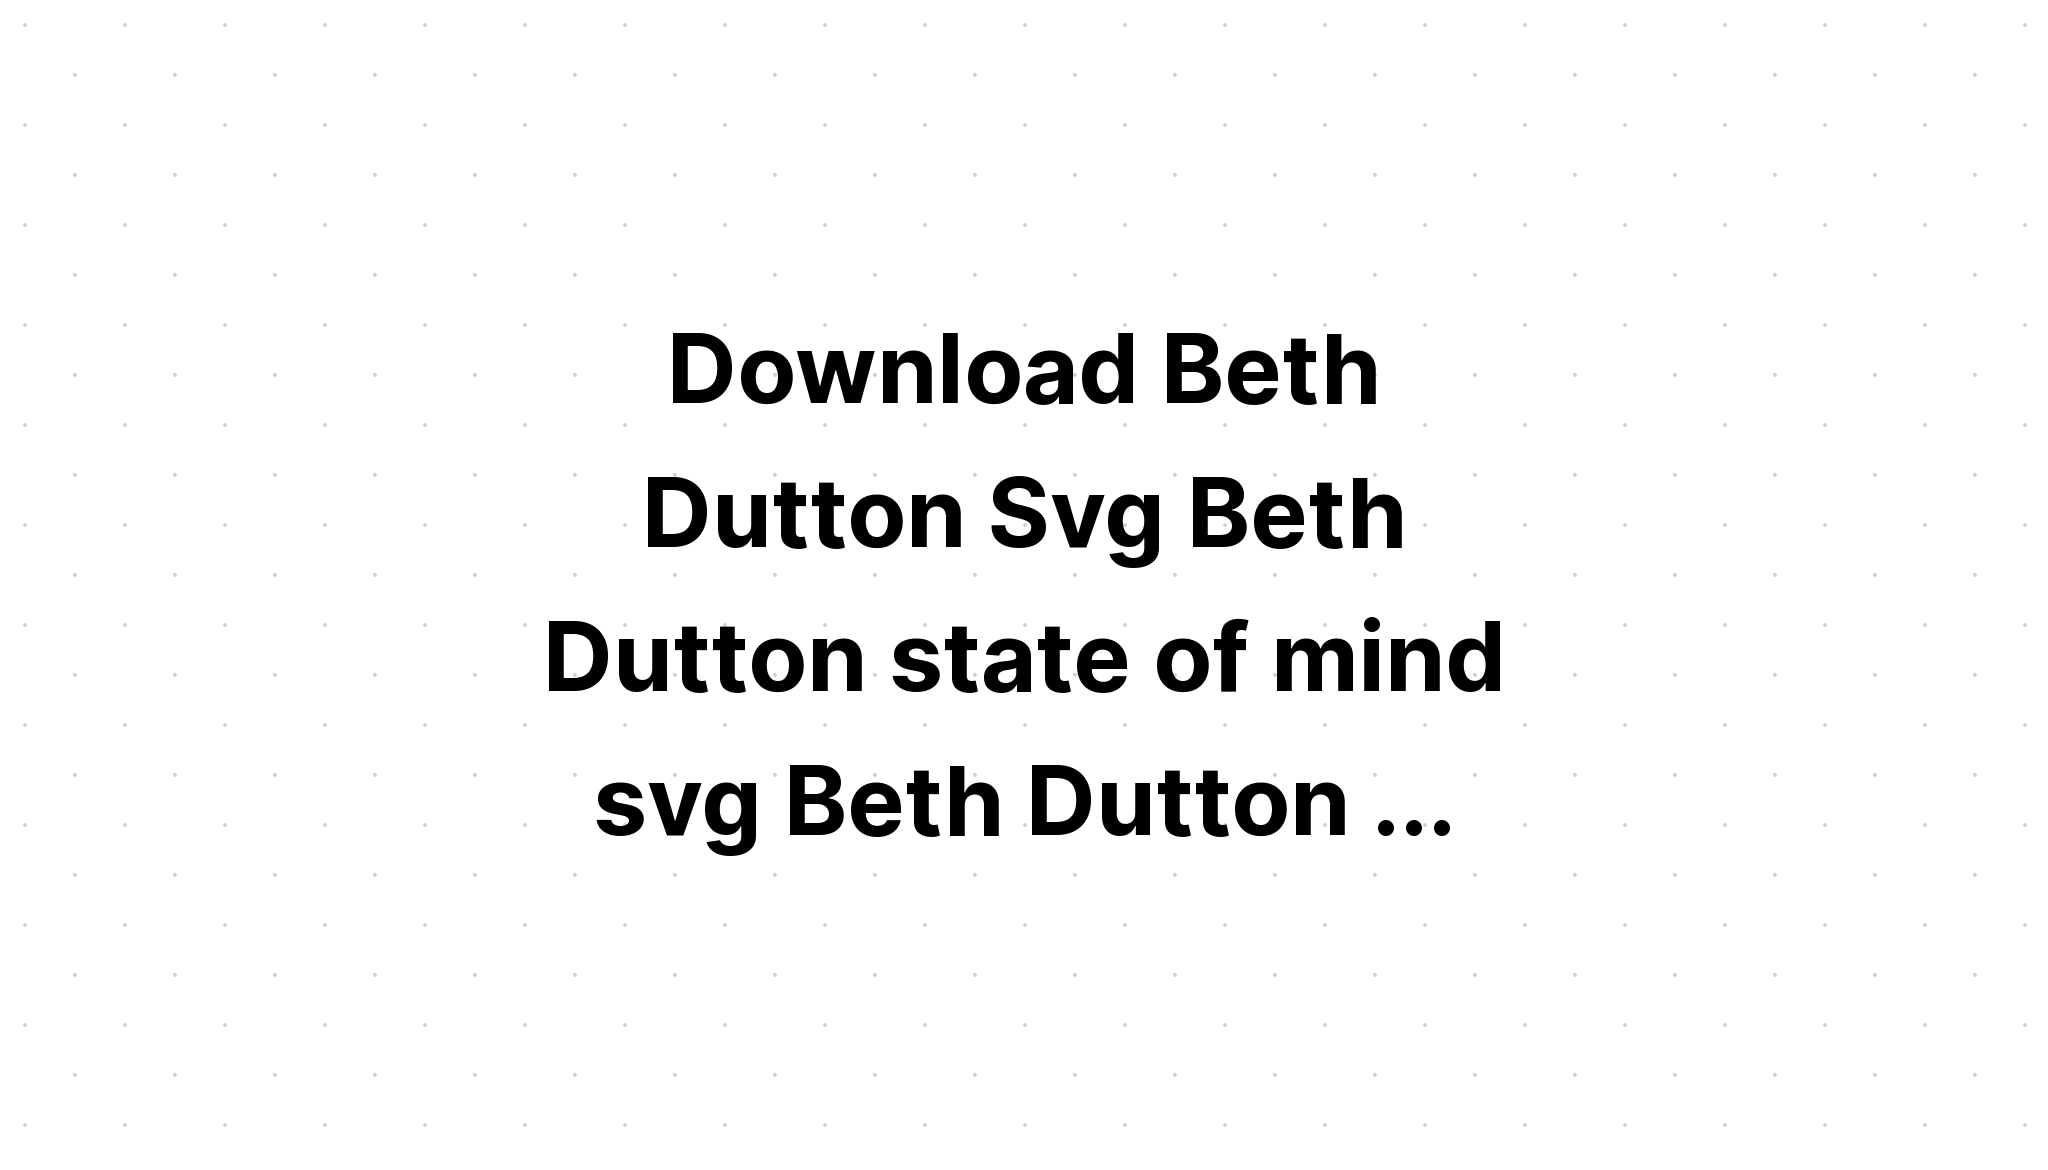 Download Beth Dutton Svg Free Download Free Svg Cut File Free Fonts 30 Best Calligraphy Fonts 2021